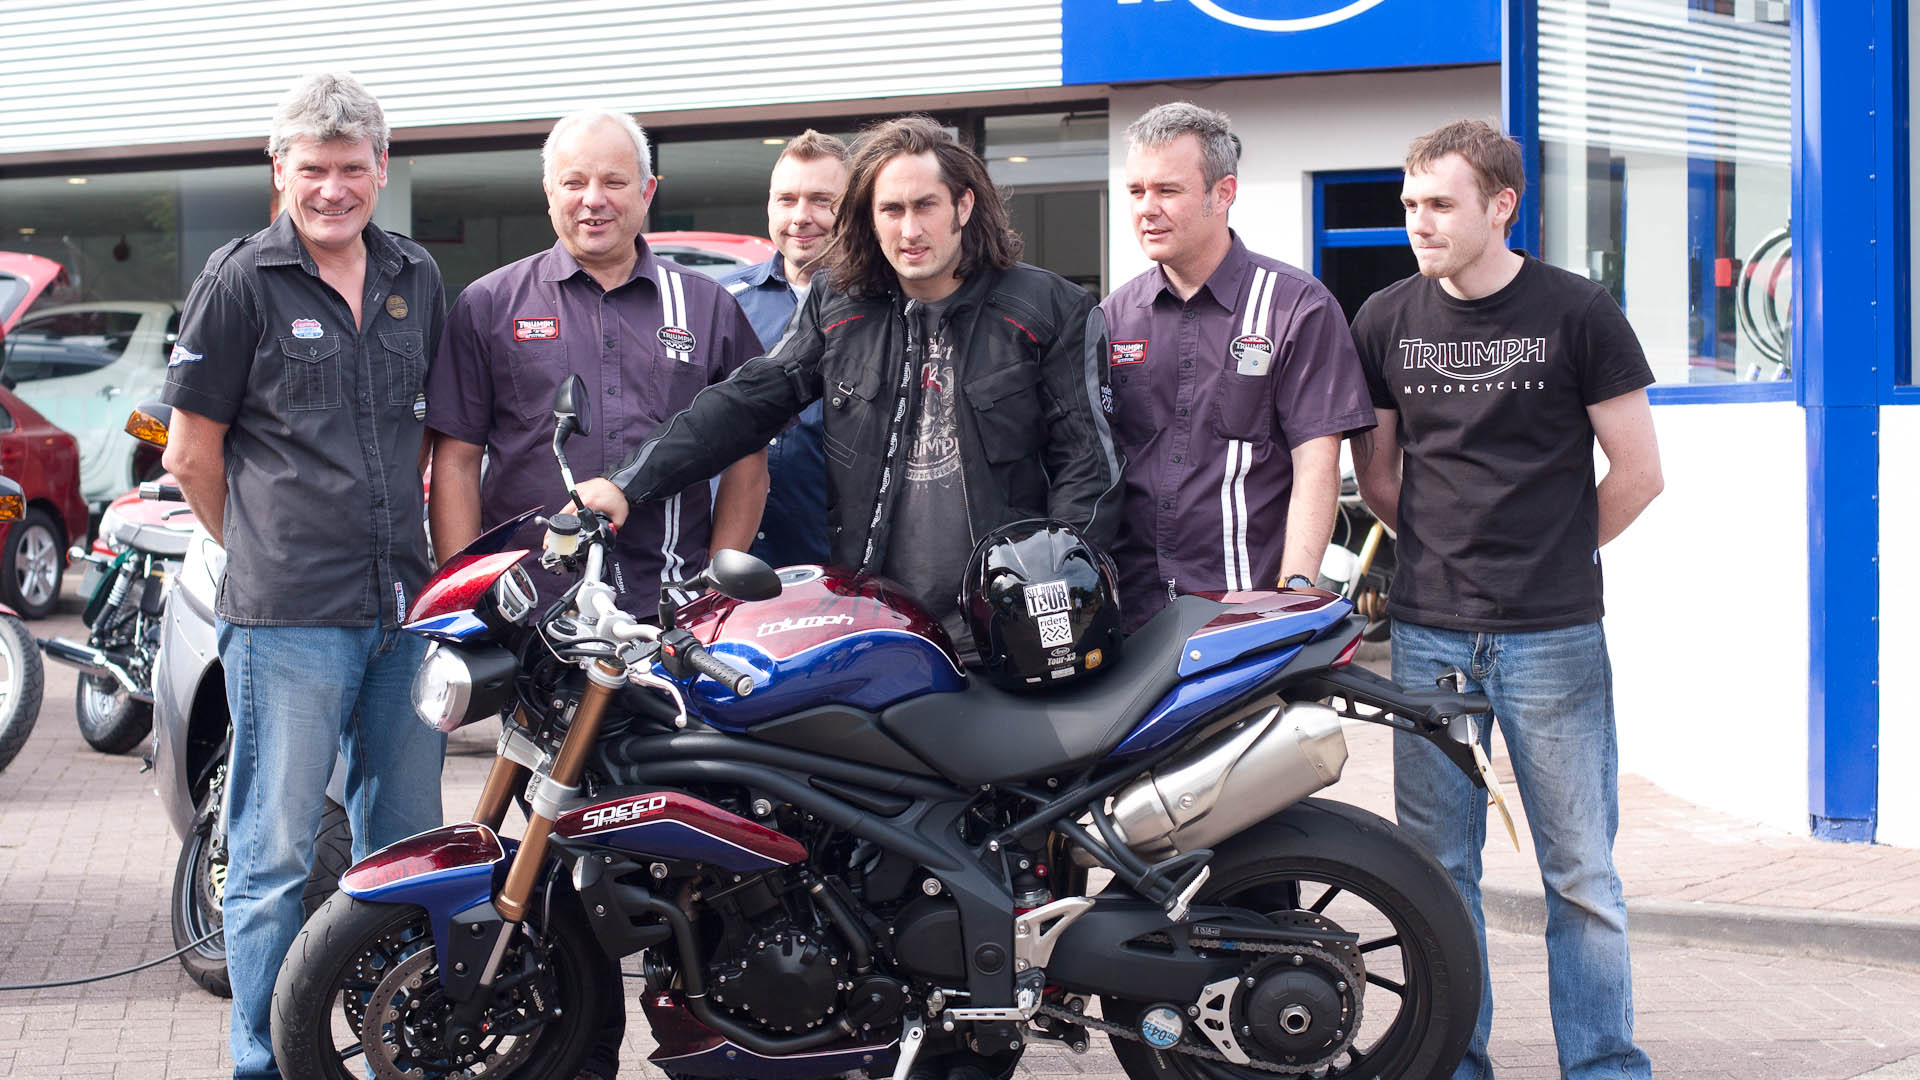 The Bulldog Team with Ross Noble 25-05-11